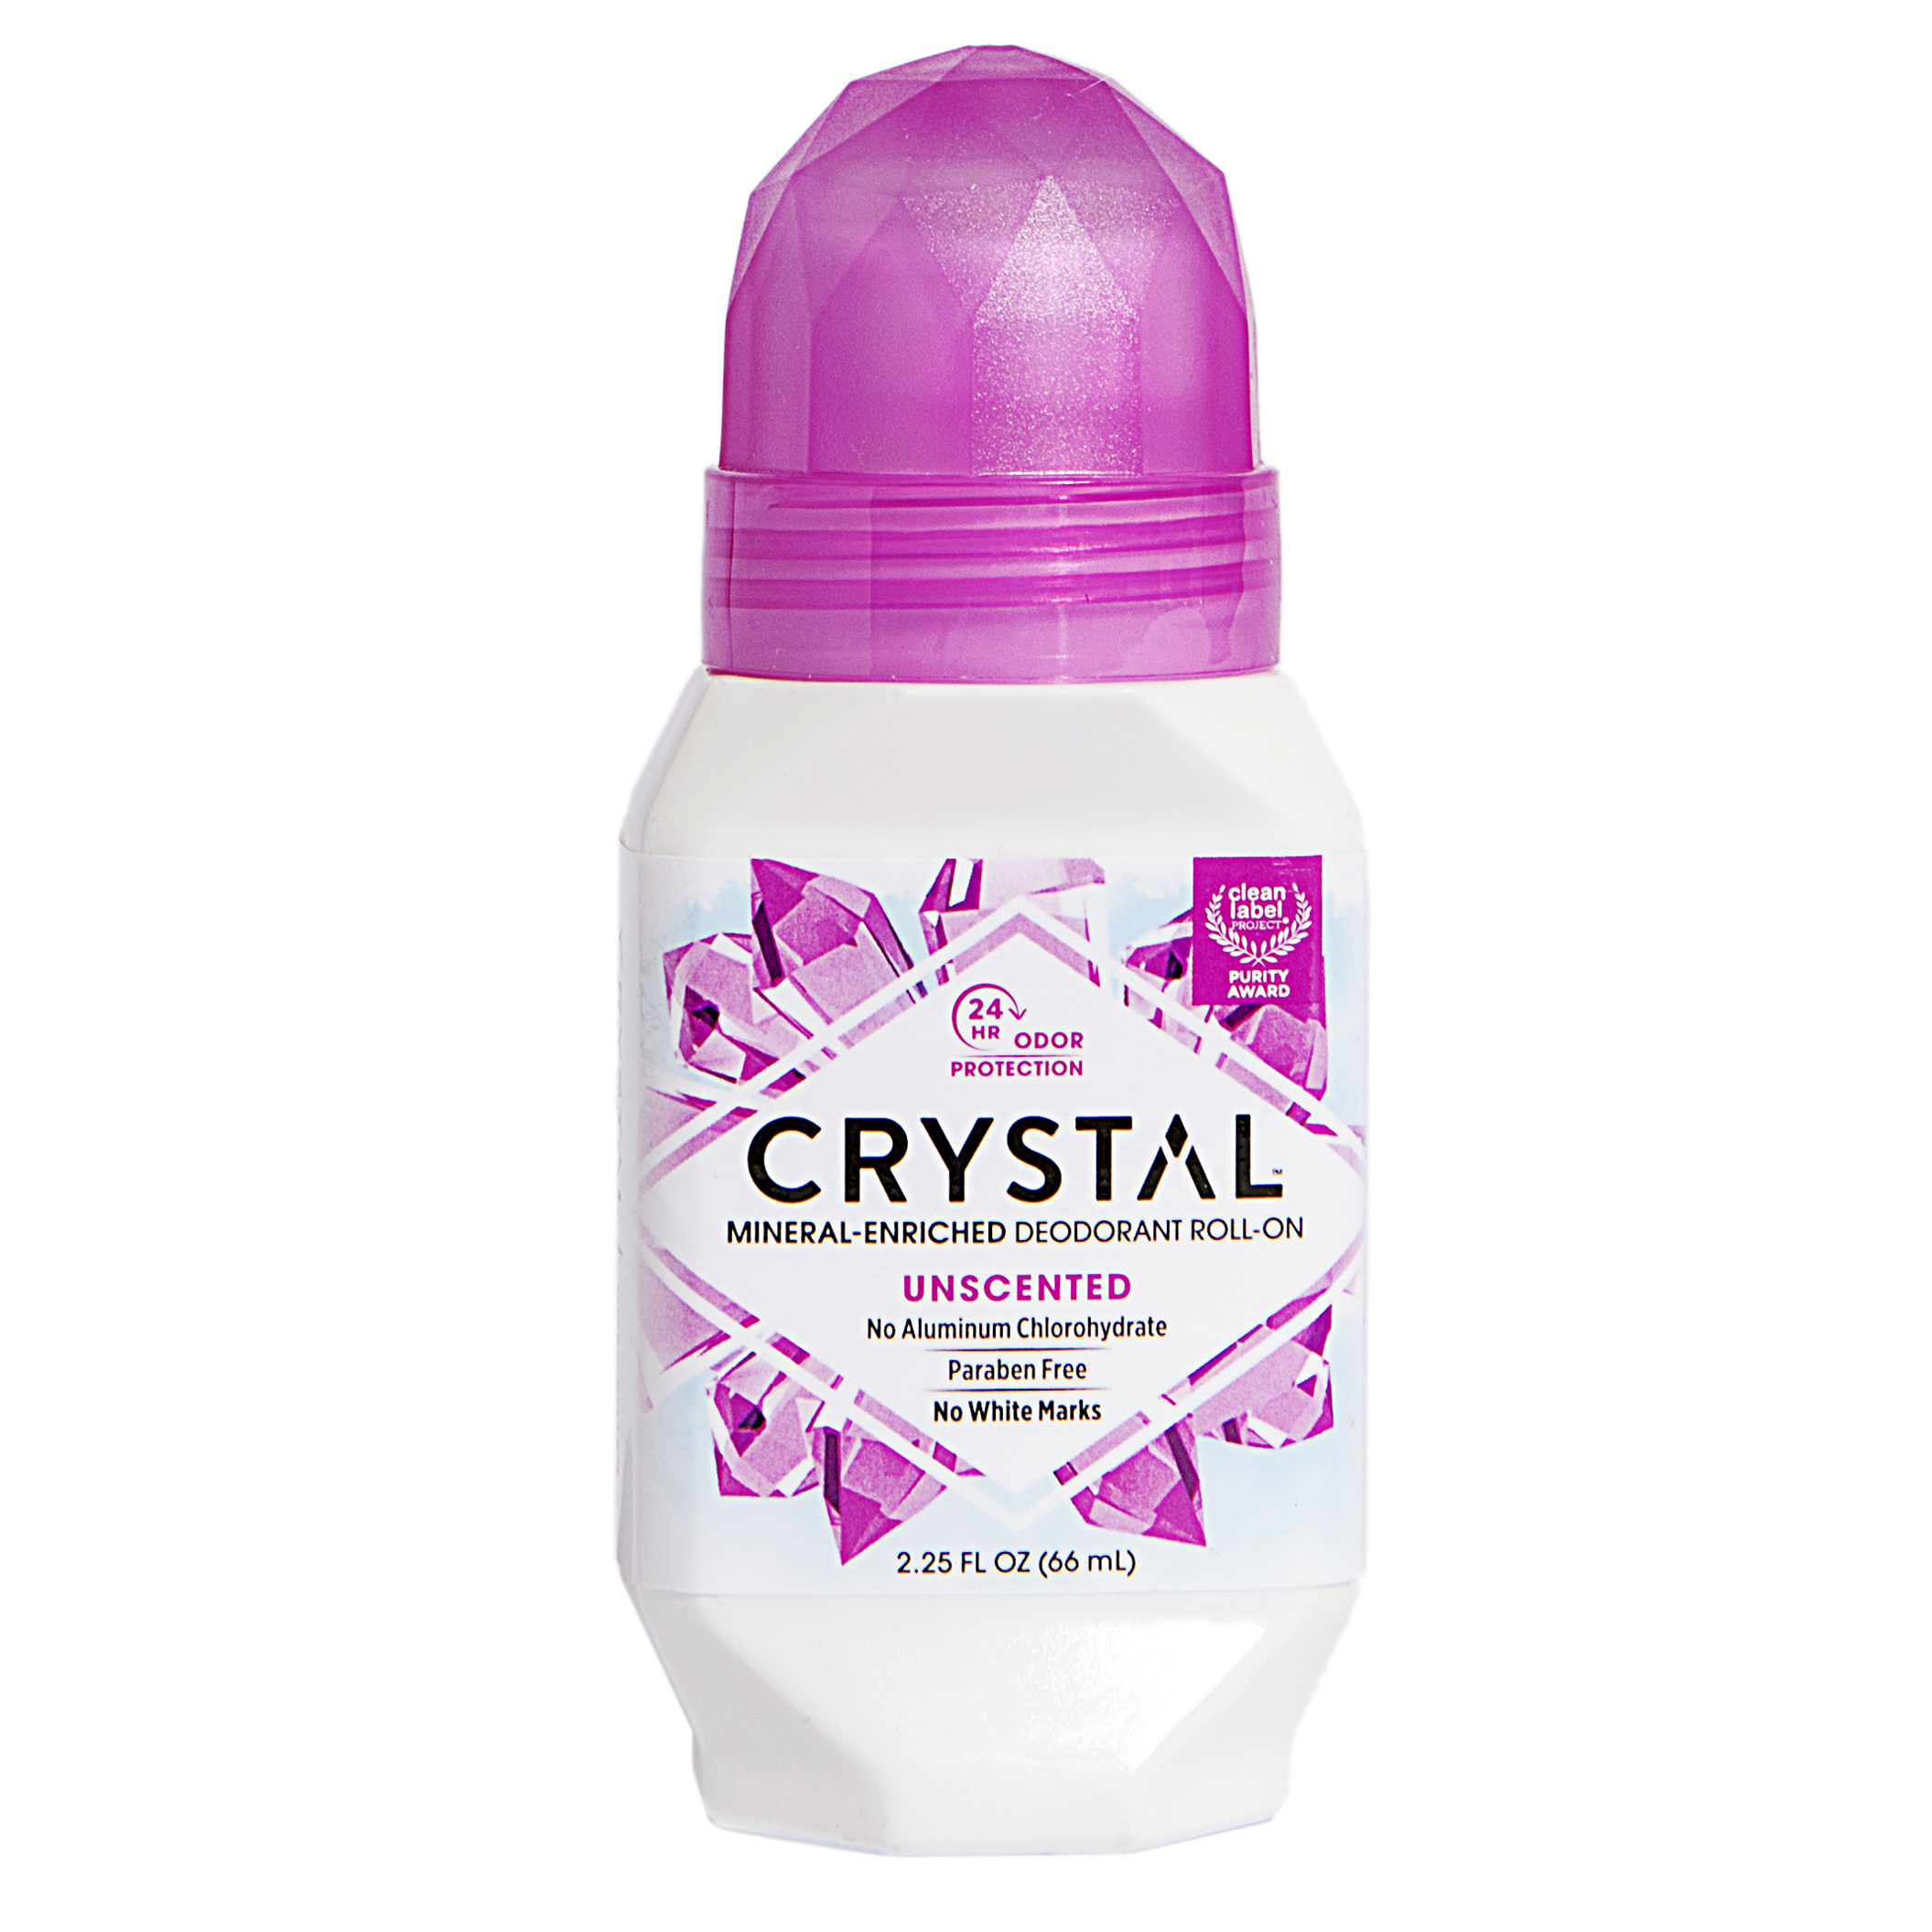 Crystal Natural Protection Roll-On Body Deodorant, 2.25 fl oz - image 1 of 9